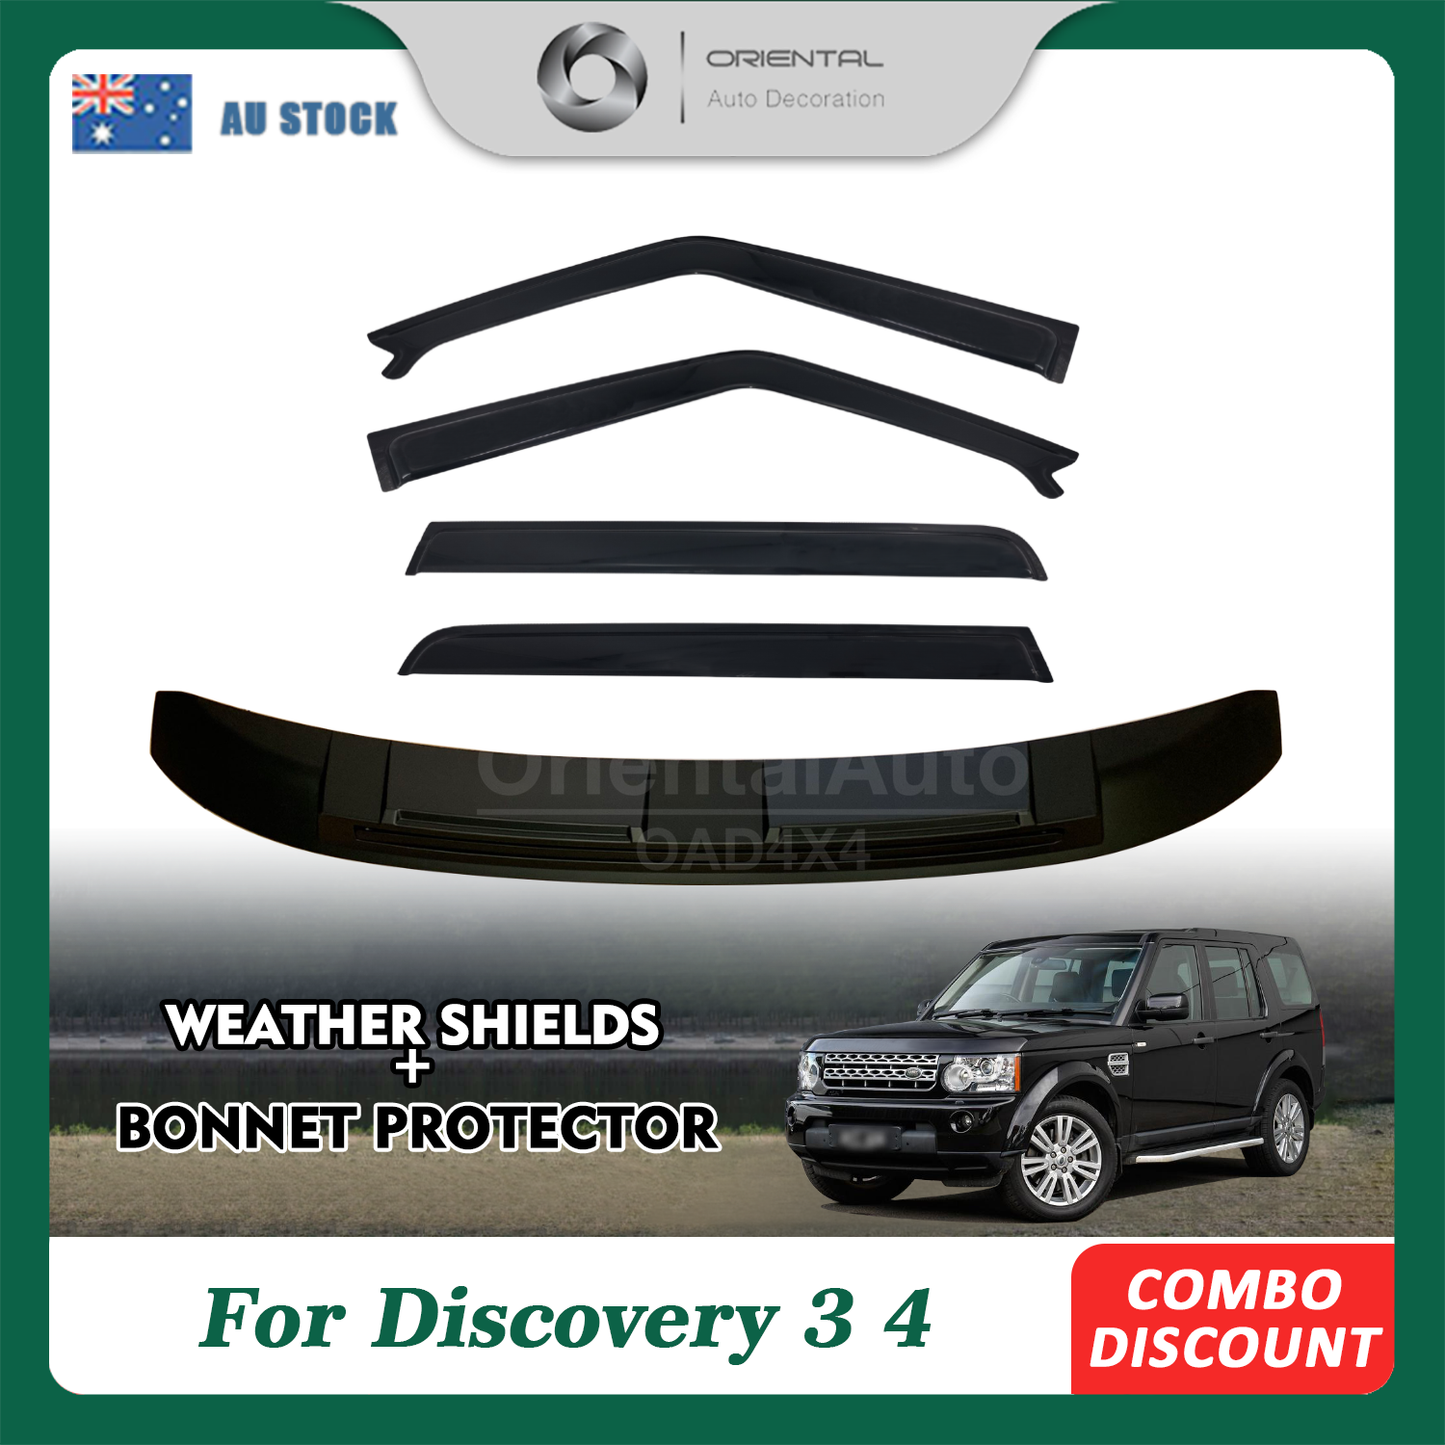 Bonnet Protector & Luxury Weathershield for Land Rover Discovery 3 4 2004-2017 Weather Shields Window Visor Hood Protector Guard